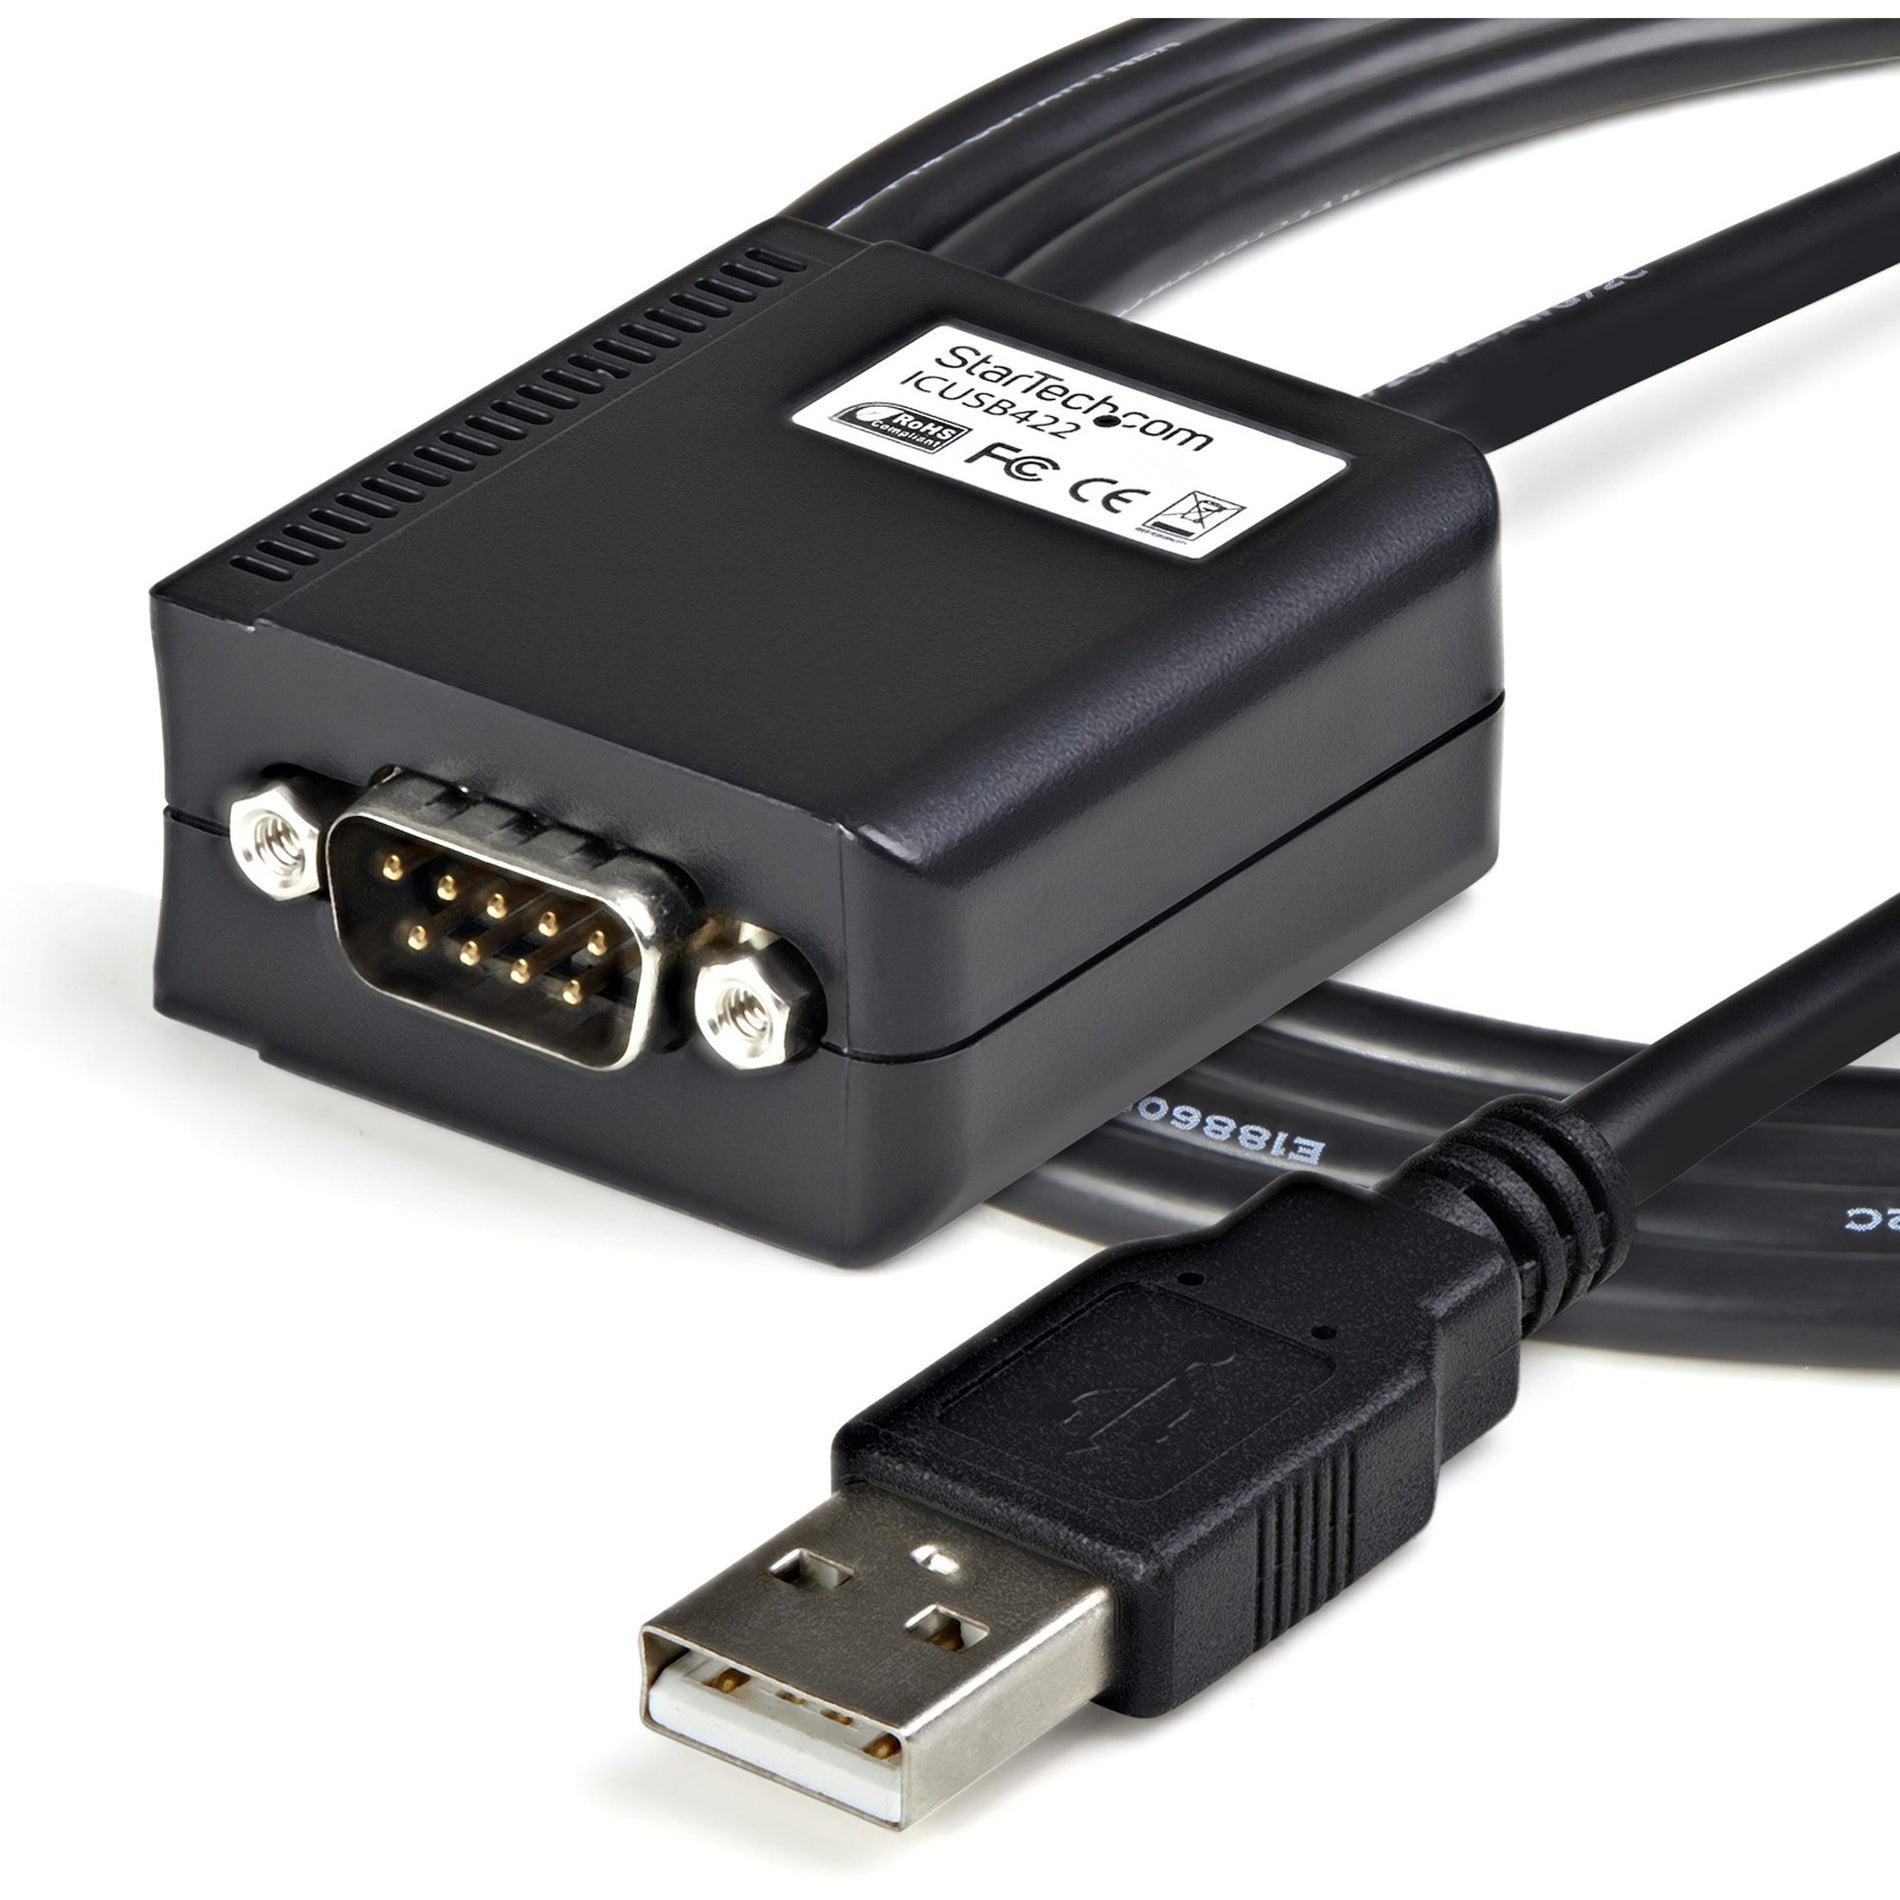 StarTech.com ICUSB422 6ft RS422/485 USB Serial Adapter with COM Retention, Plug and Play Compatible with Windows, Mac, and Linux